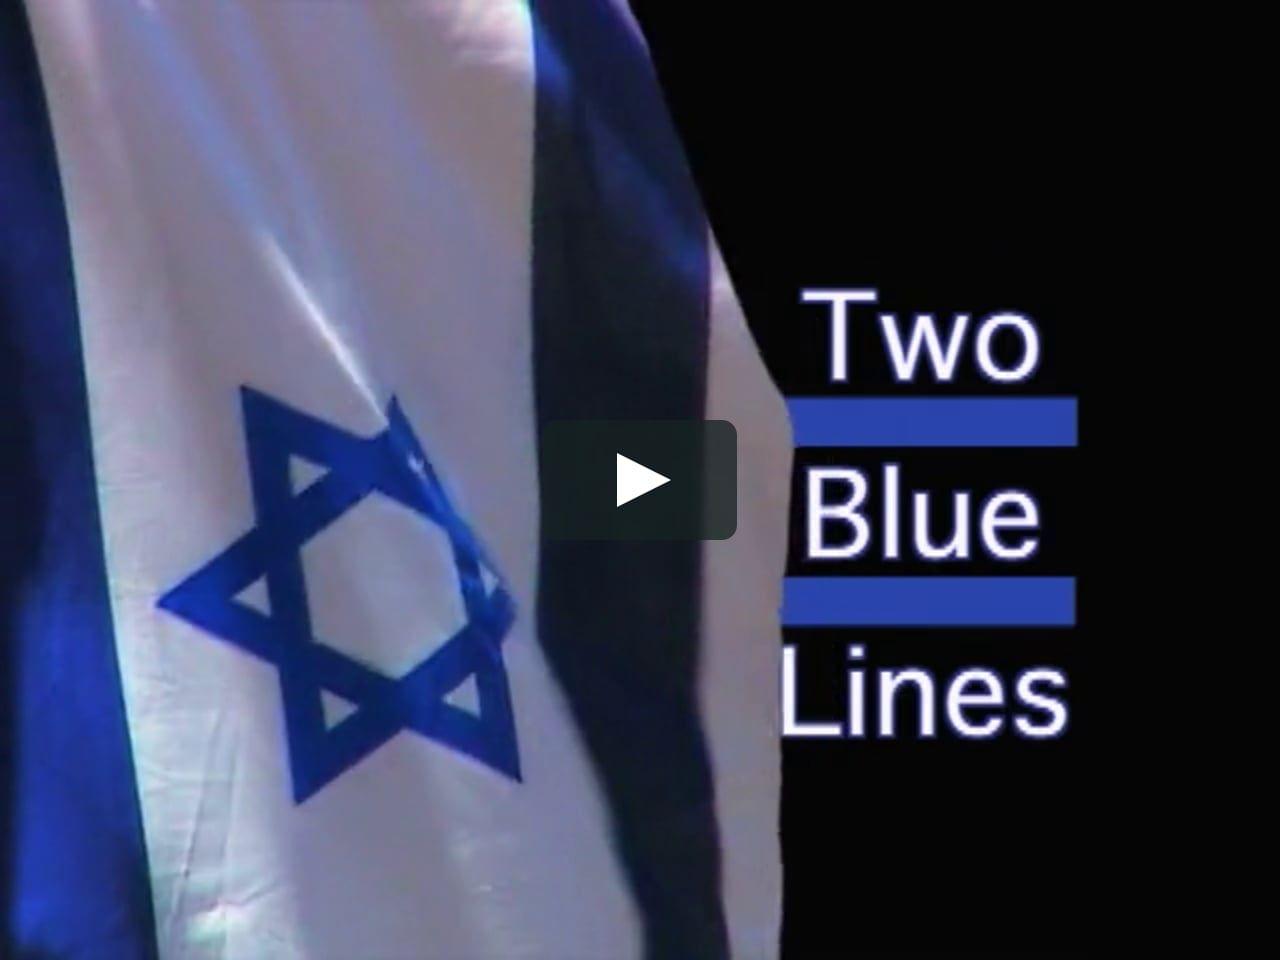 Two Blue Lines Logo - Two Blue Lines Trailer on Vimeo